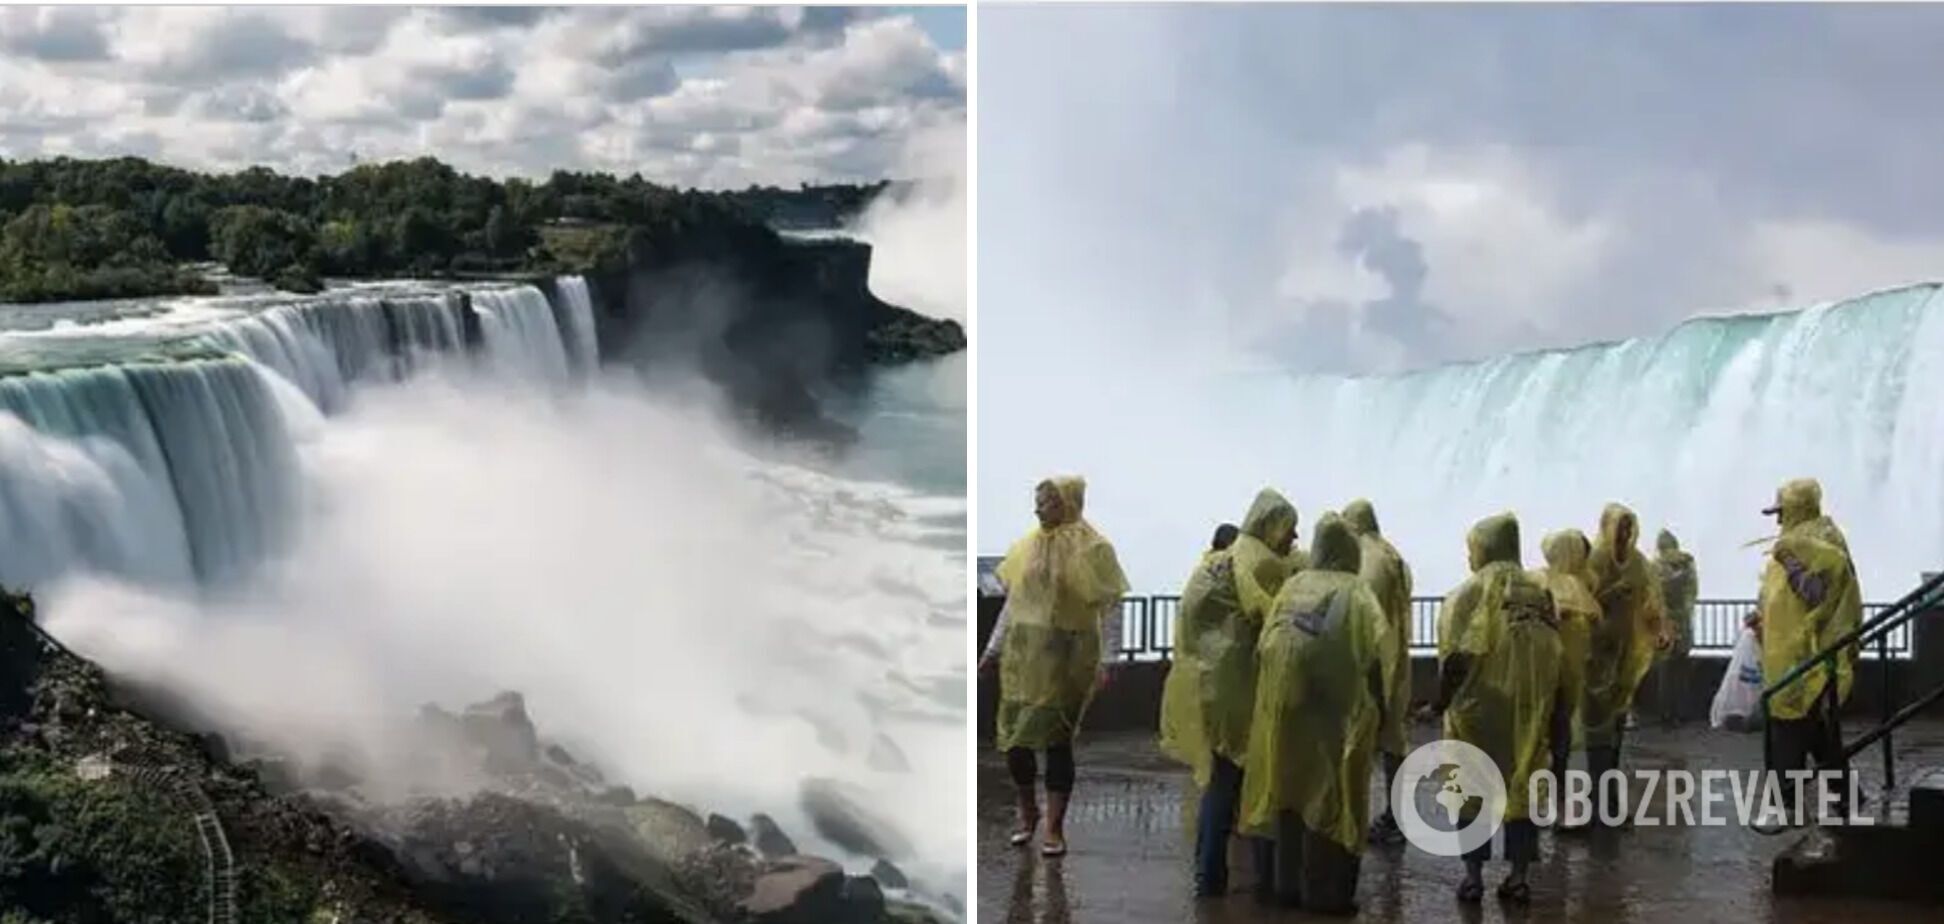 Niagara Falls is not always so picturesque